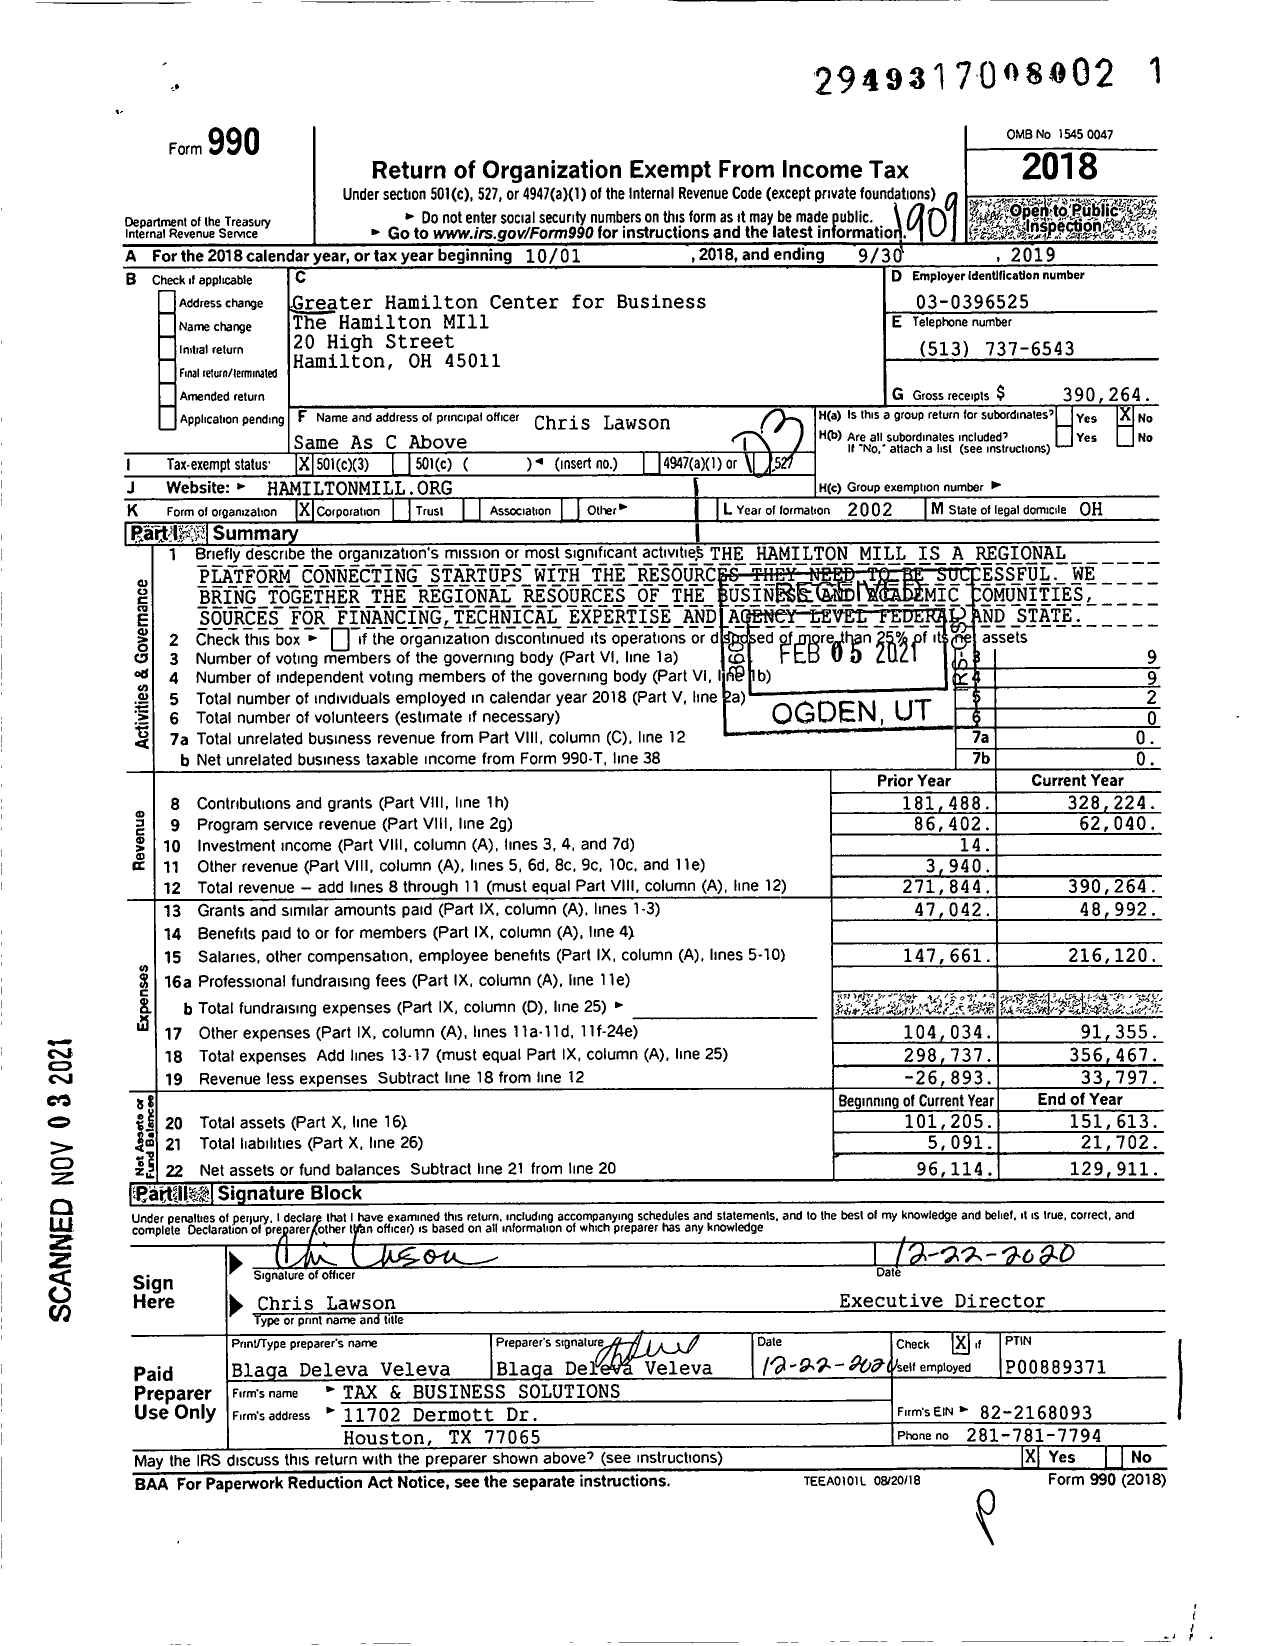 Image of first page of 2018 Form 990 for Greater Hamilton Center for Business